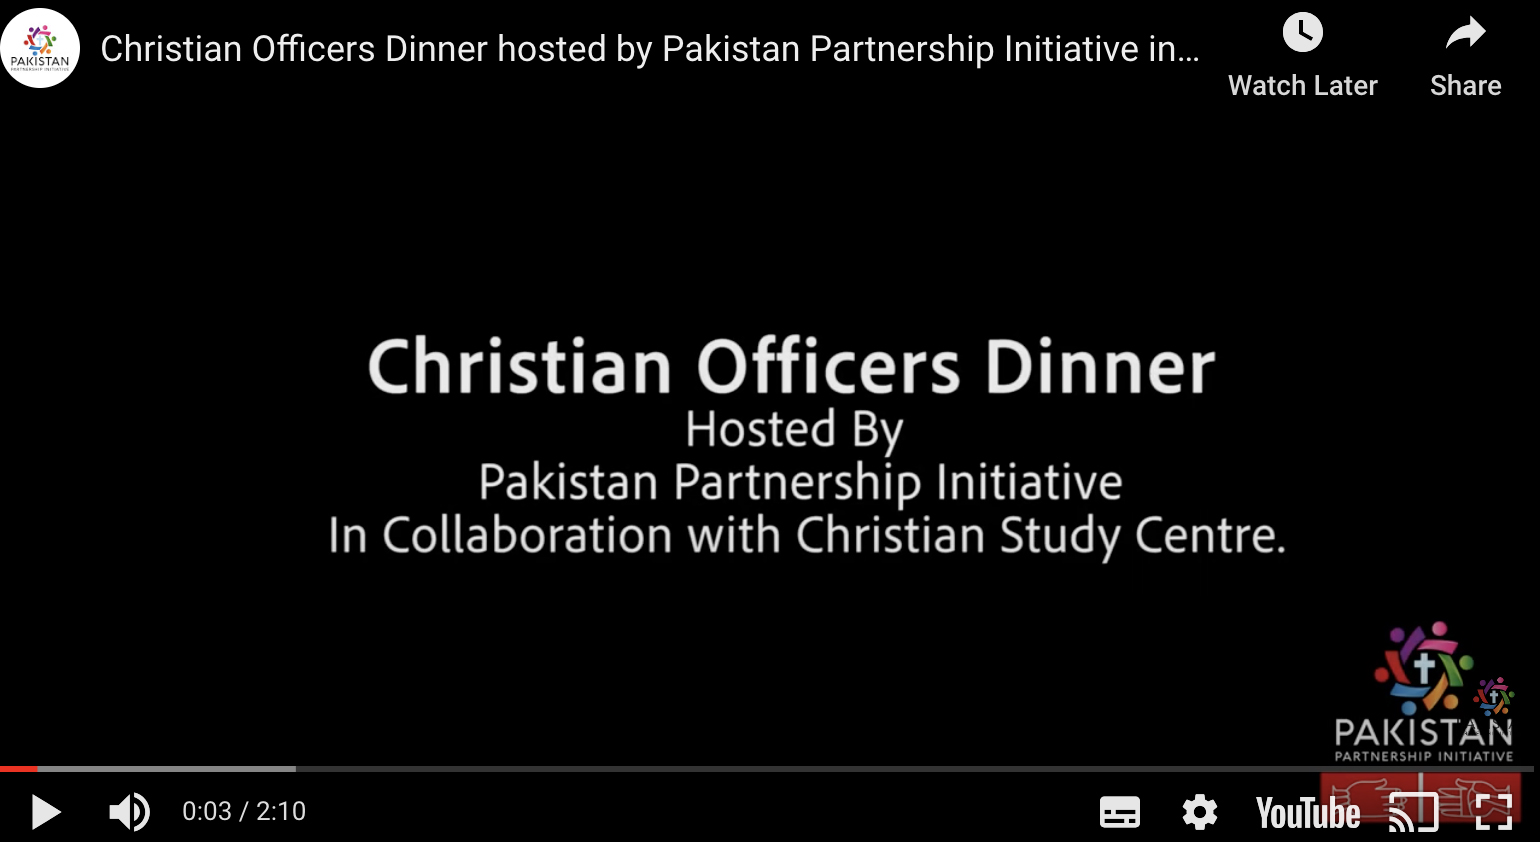 Christian Officers Dinner hosted by Pakistan Partnership Initiative in collaboration with CSC